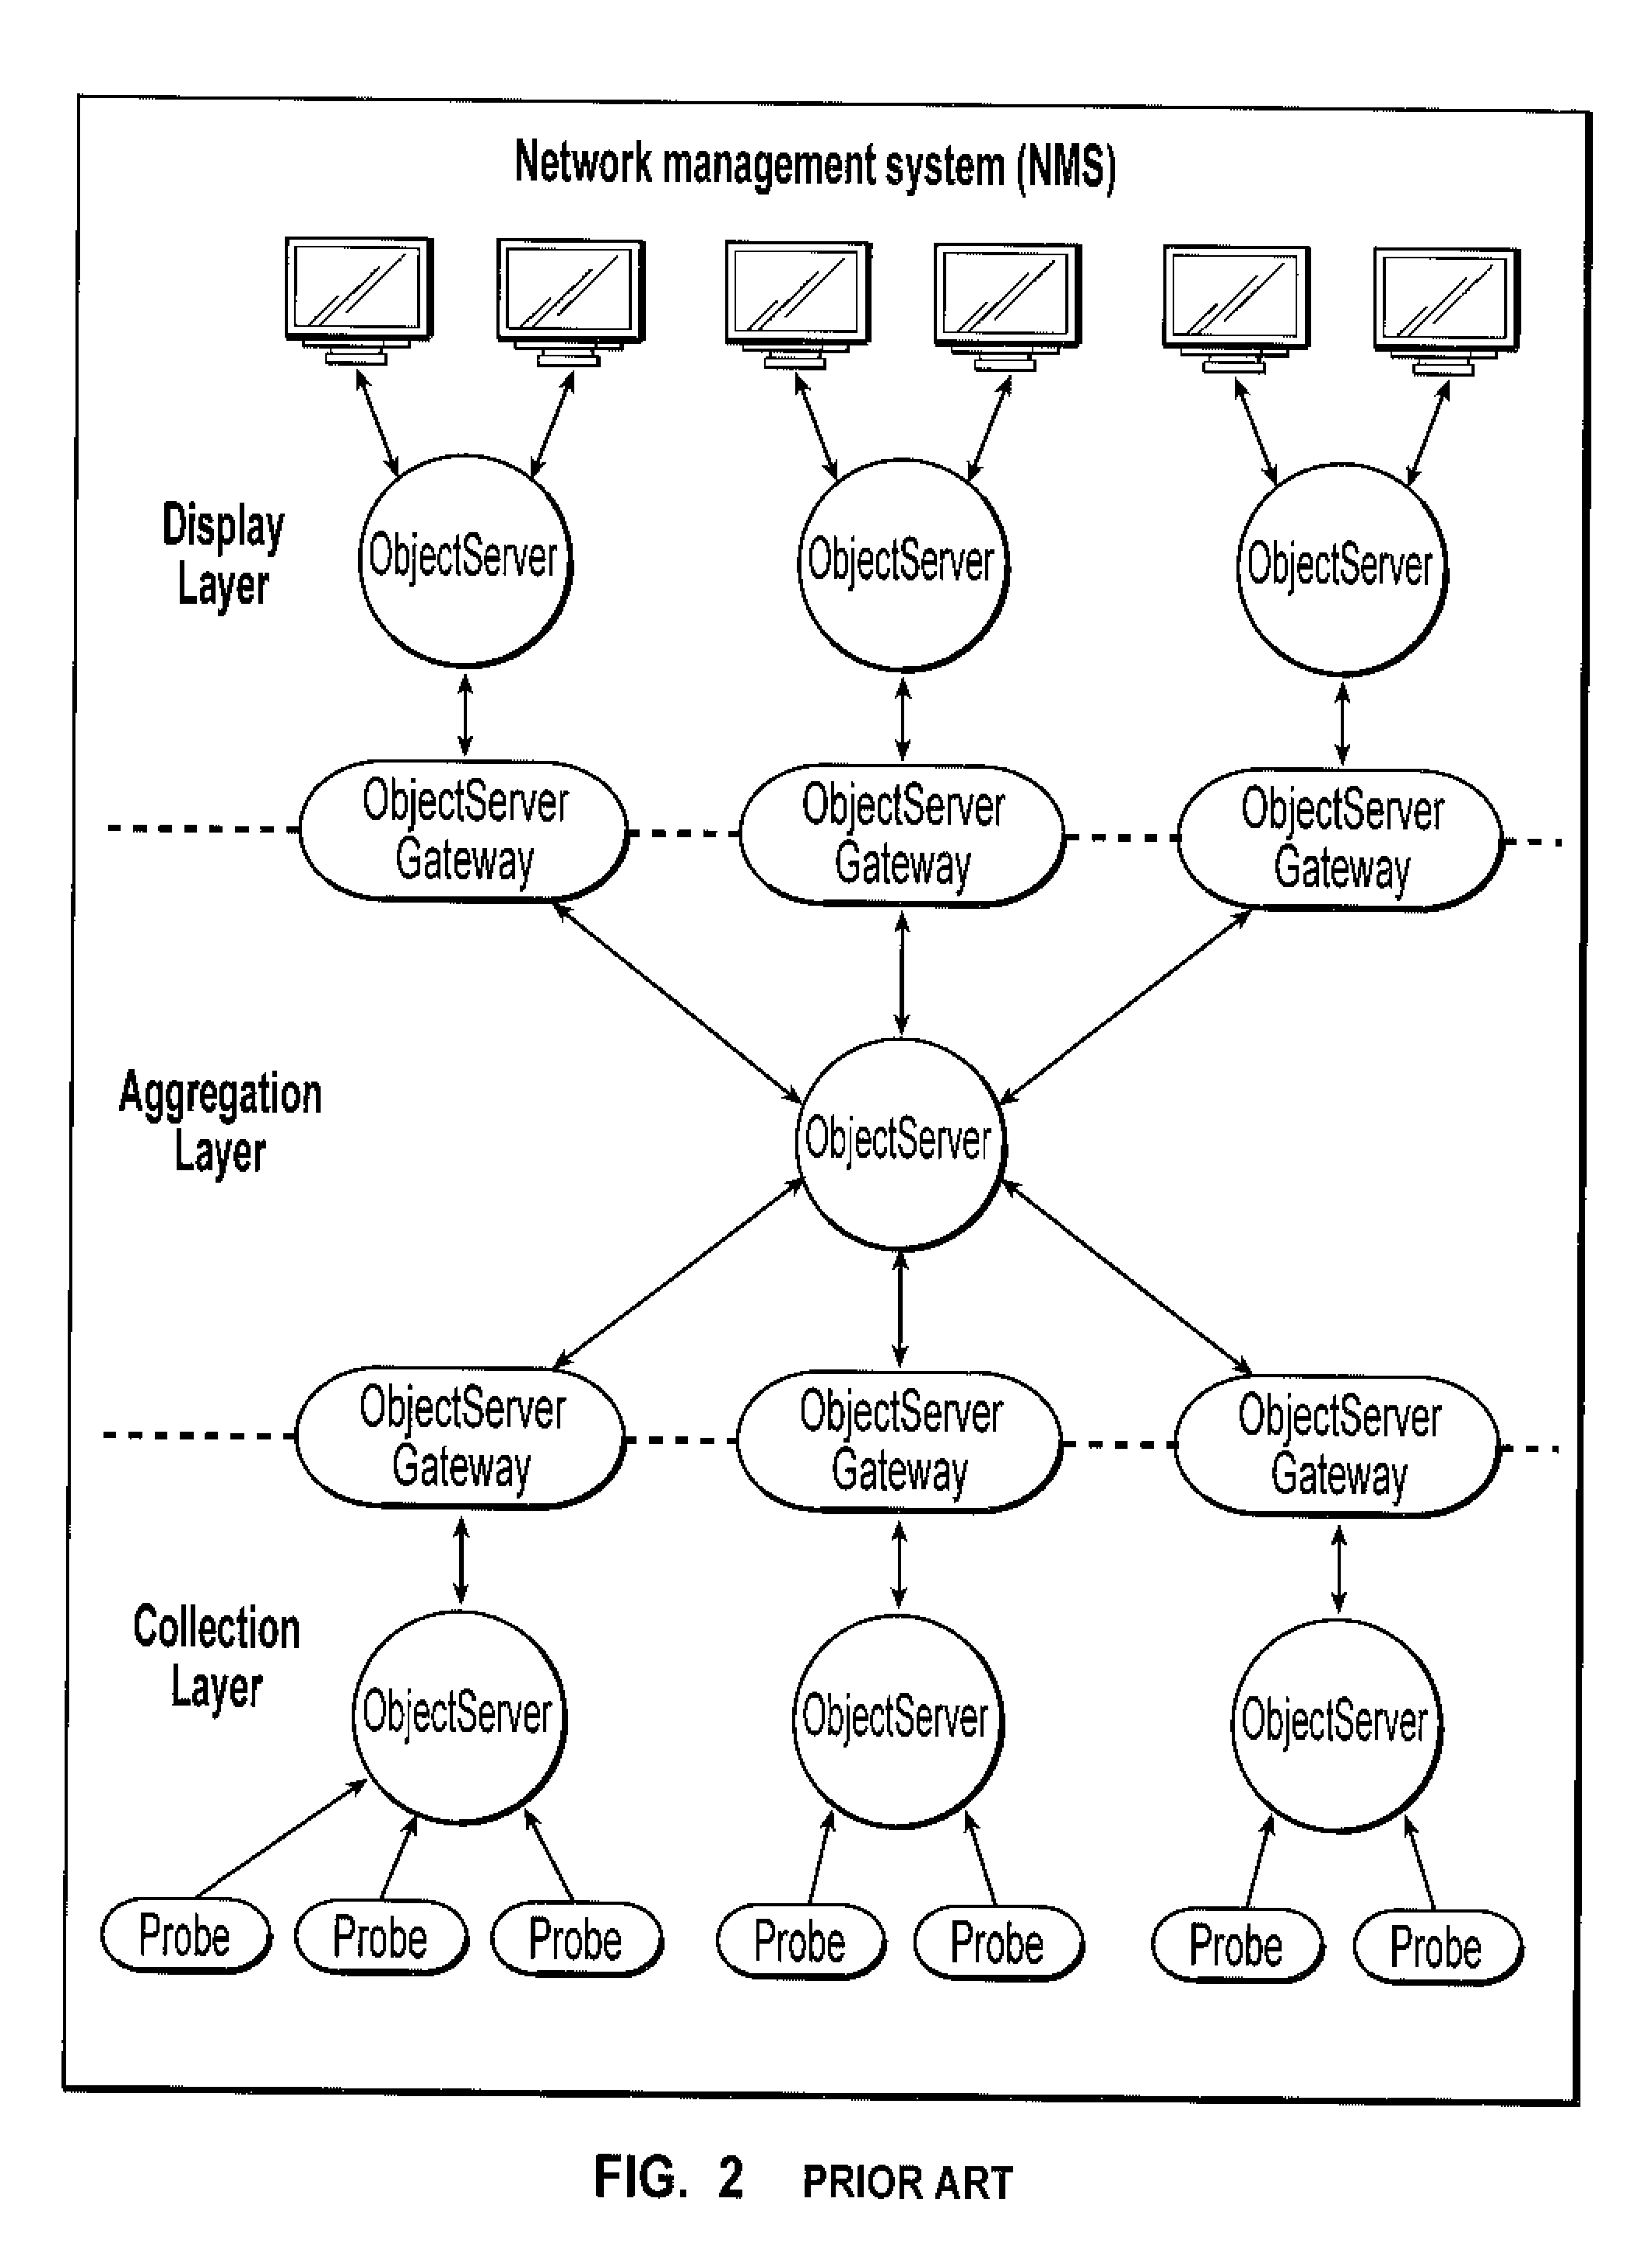 Method and apparatus for propagating accelerated events in a network management system